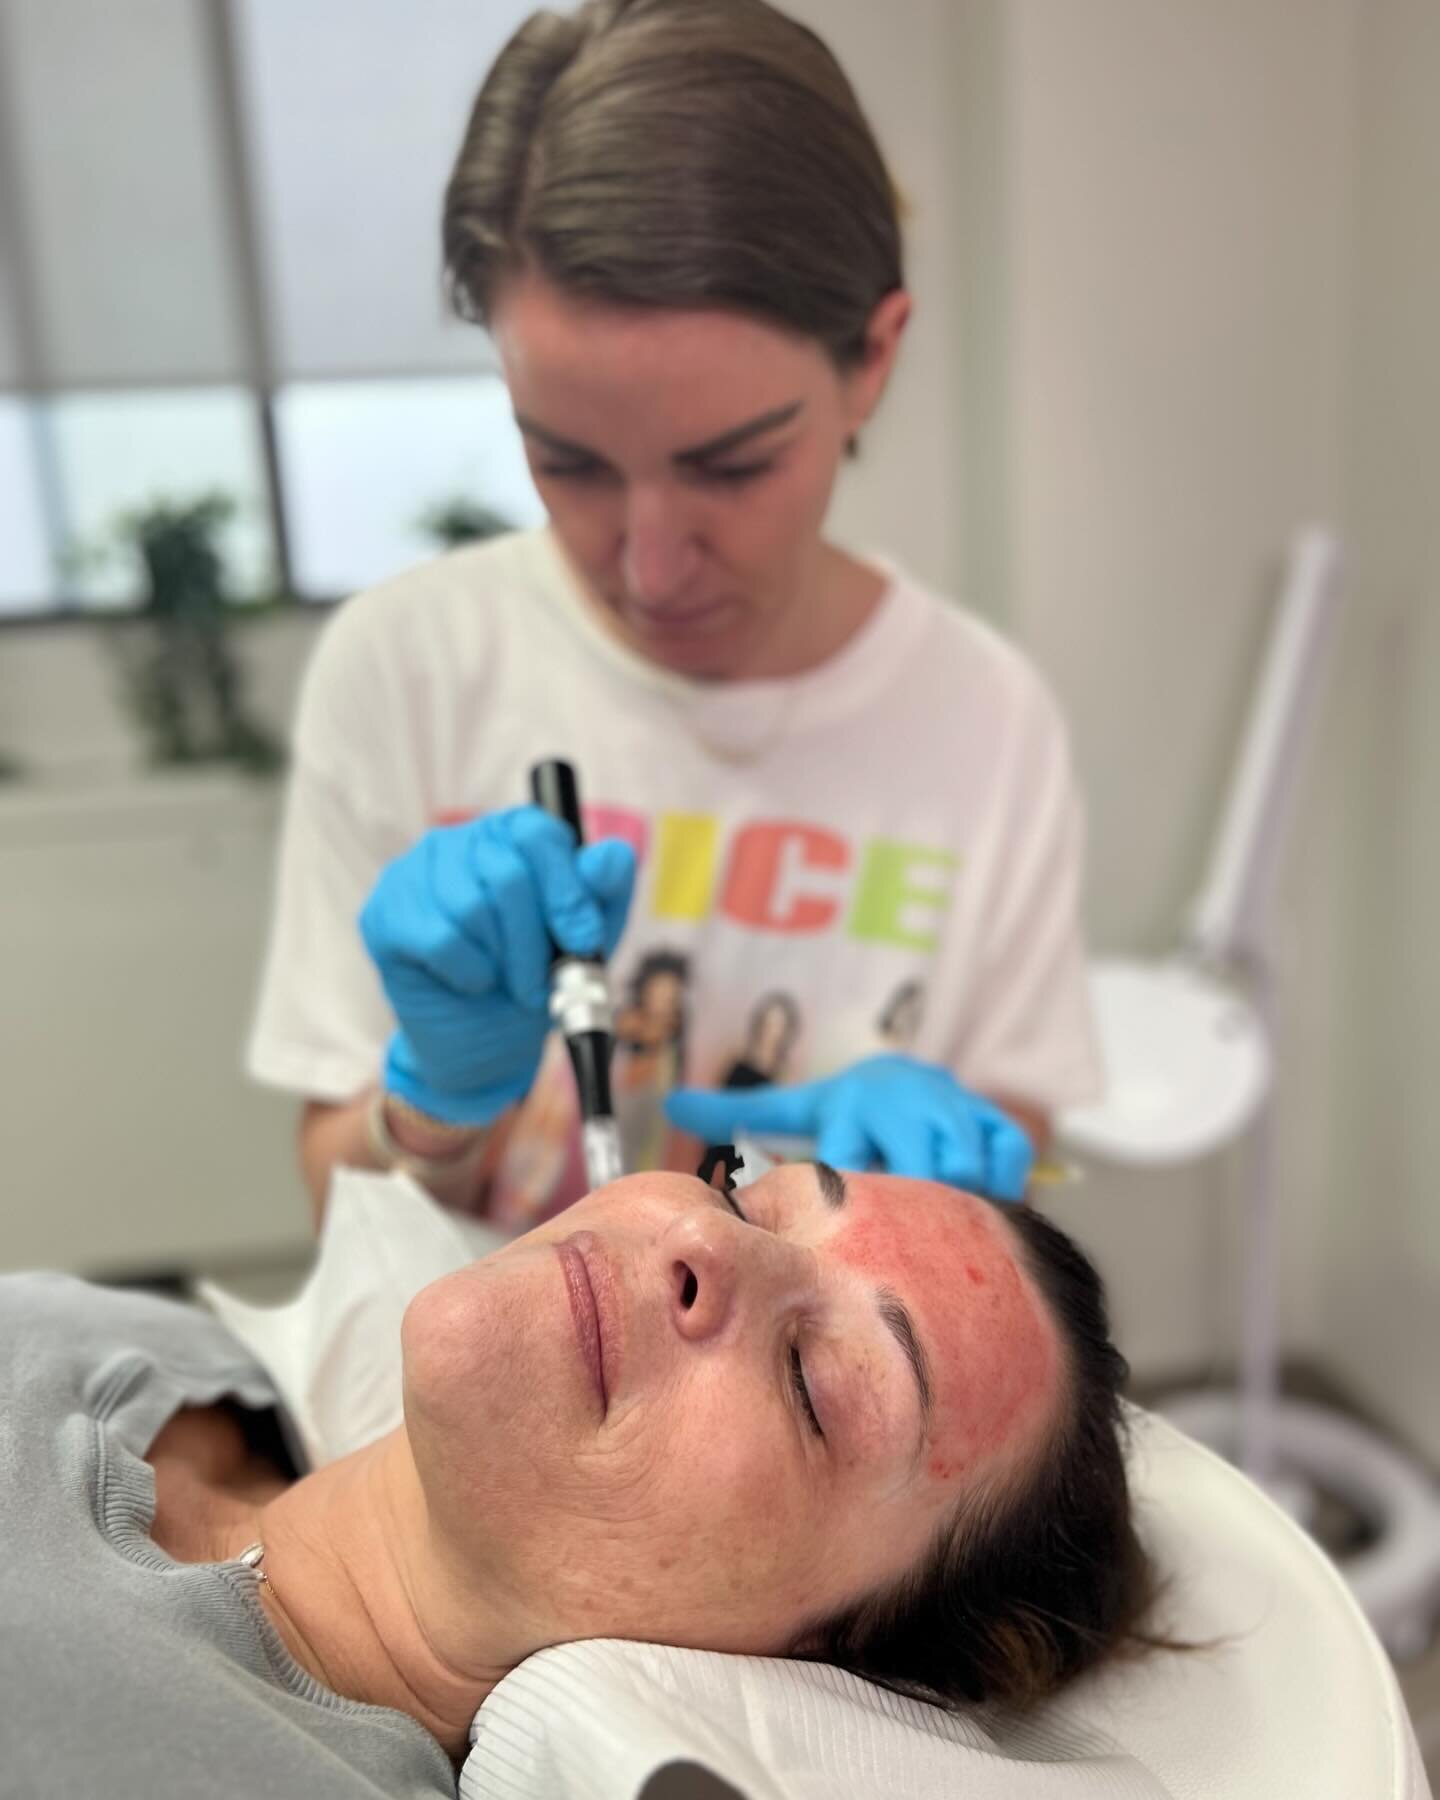 Fun fact: 1 microneedling treatment a year yields the same amount of collagen we lose a year. 

It&rsquo;s like hitting pause on aging and hitting rewind for youthful skin! ✨

The science and everything you need to know about microneedling and PRP is